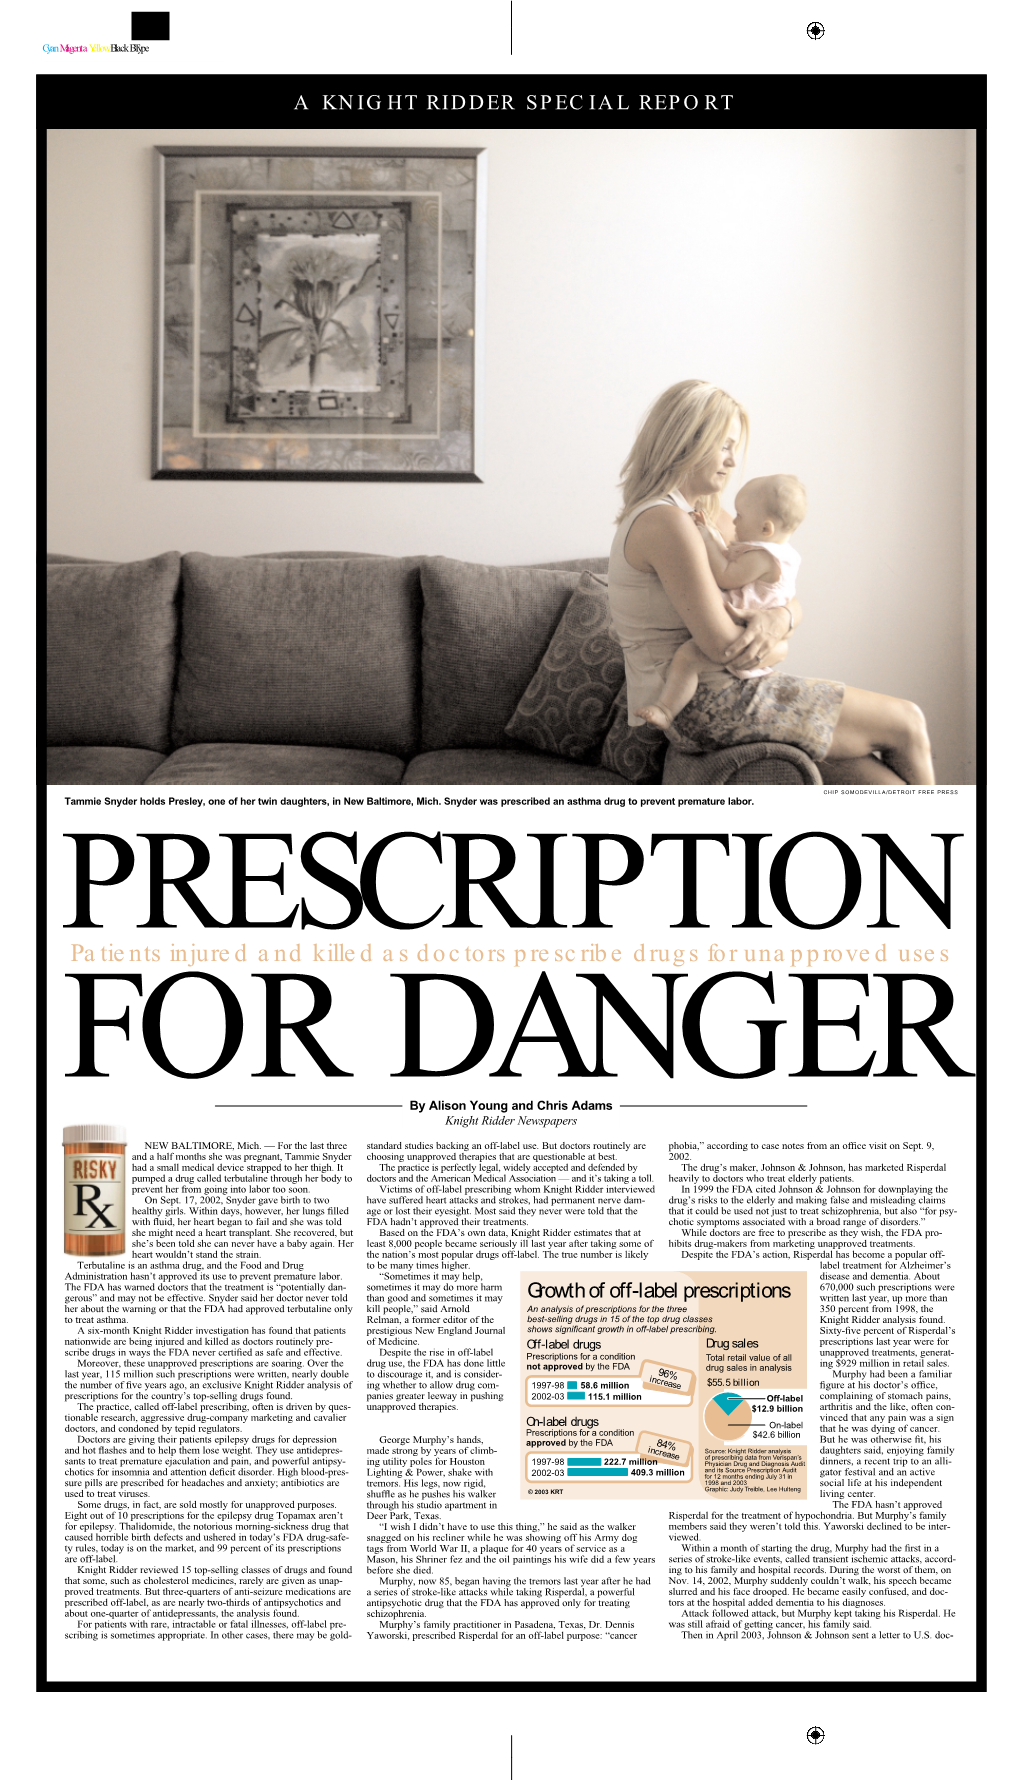 Patients Injured and Killed As Doctors Prescribe Drugs for Unapproved Uses for DANGER by Alison Young and Chris Adams Knight Ridder Newspapers